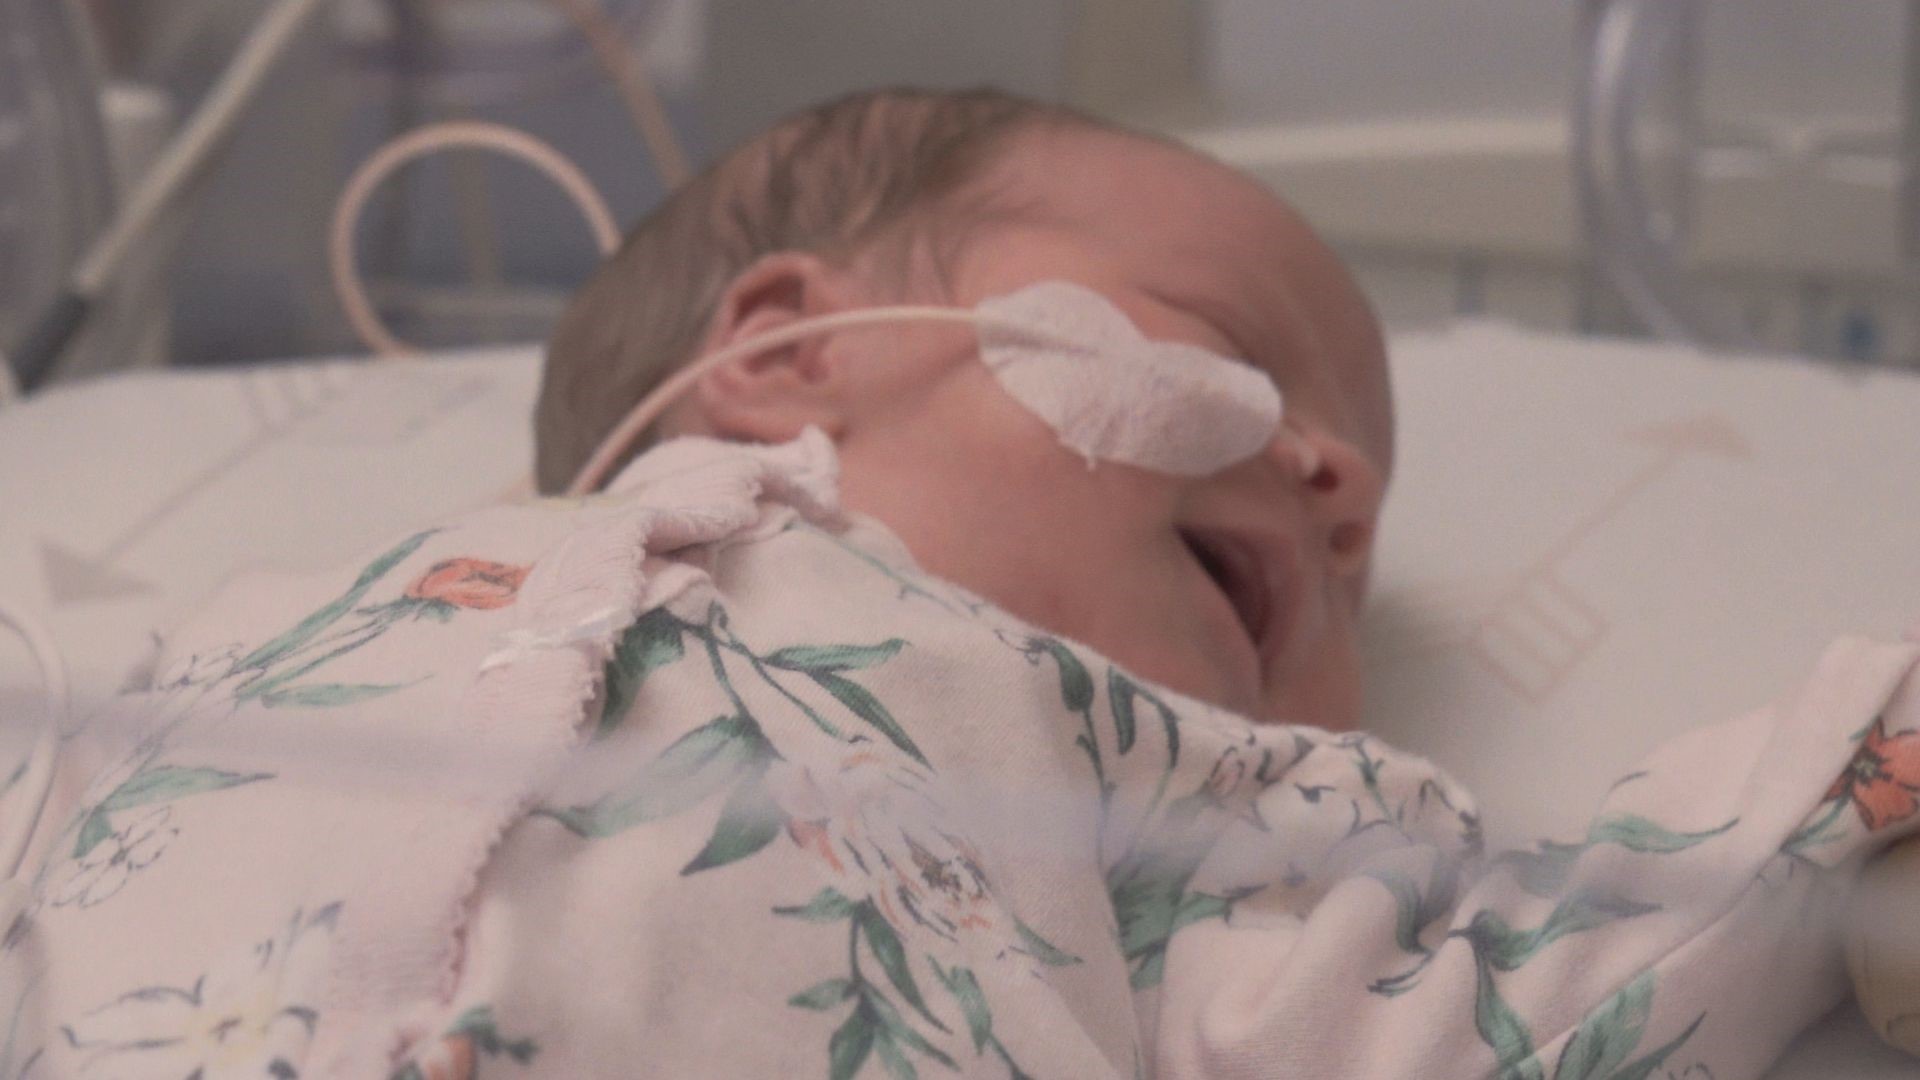 Willow spent her birth night on a ventilator. Feeding issues kept her in the NICU. A week later, a tropical wave called Dorian developed into a hurricane, with the Georgia coast in its path.